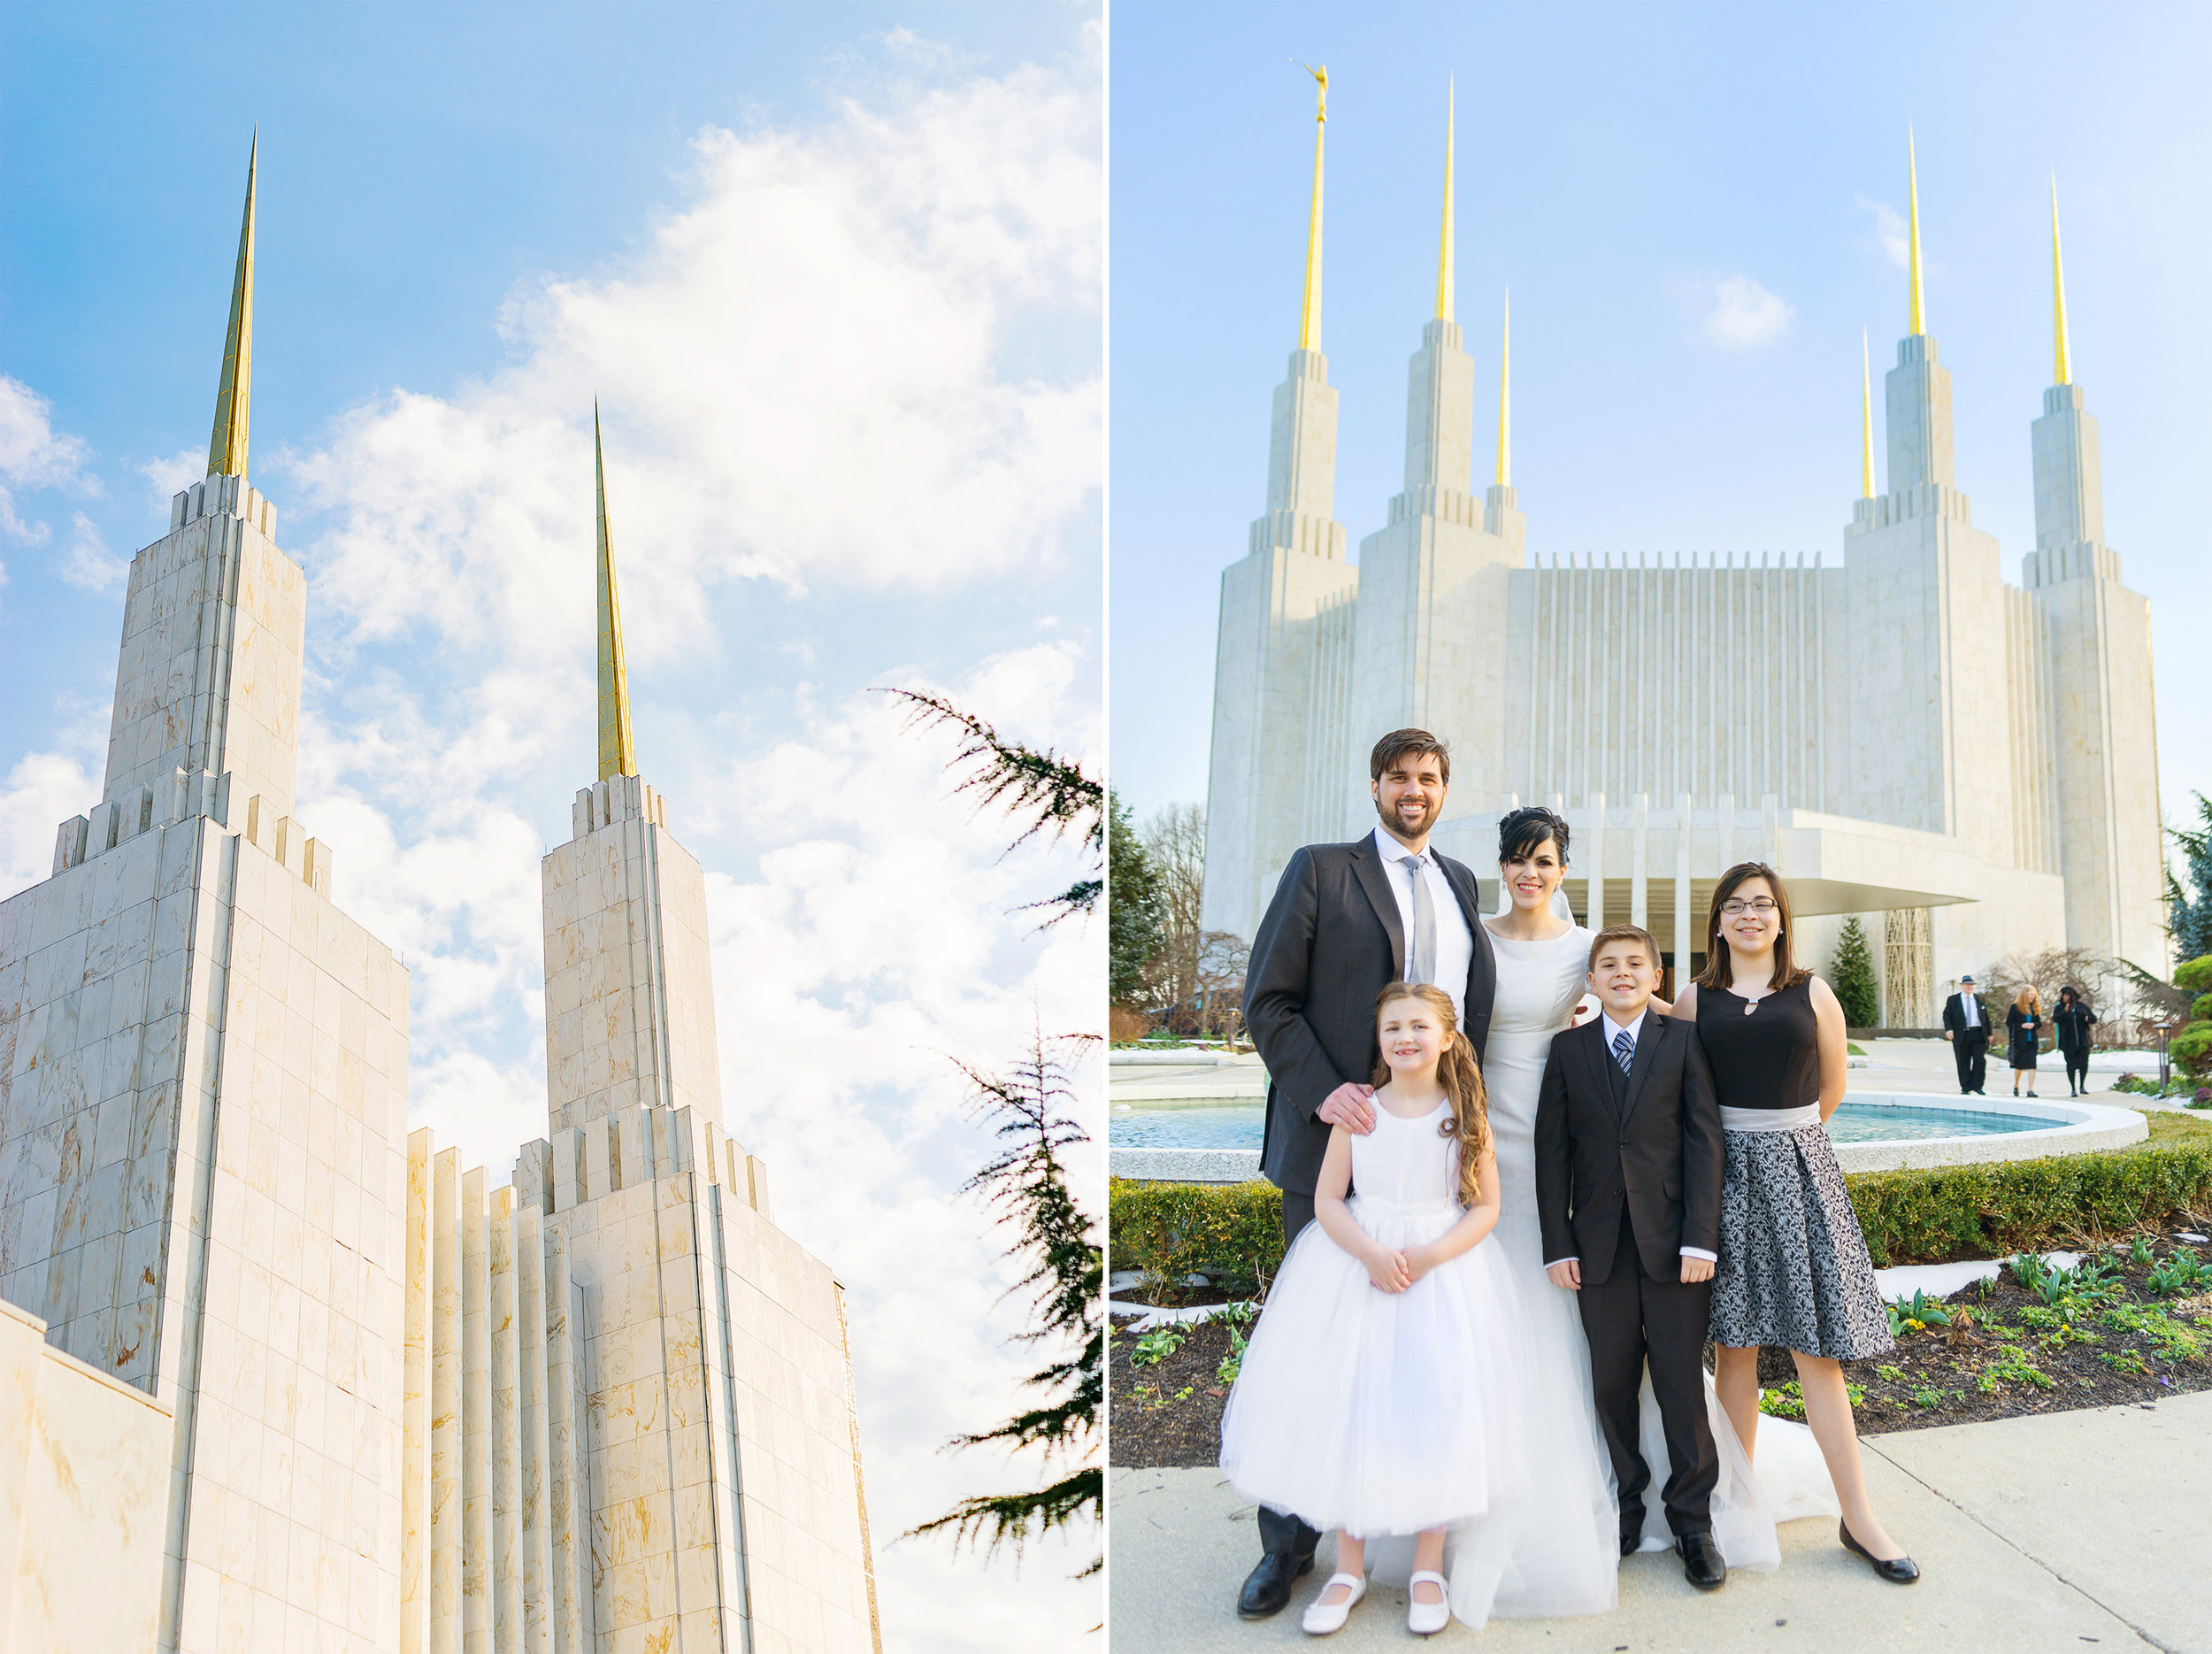 Amazing LDS temple in Maryland family photos after wedding 